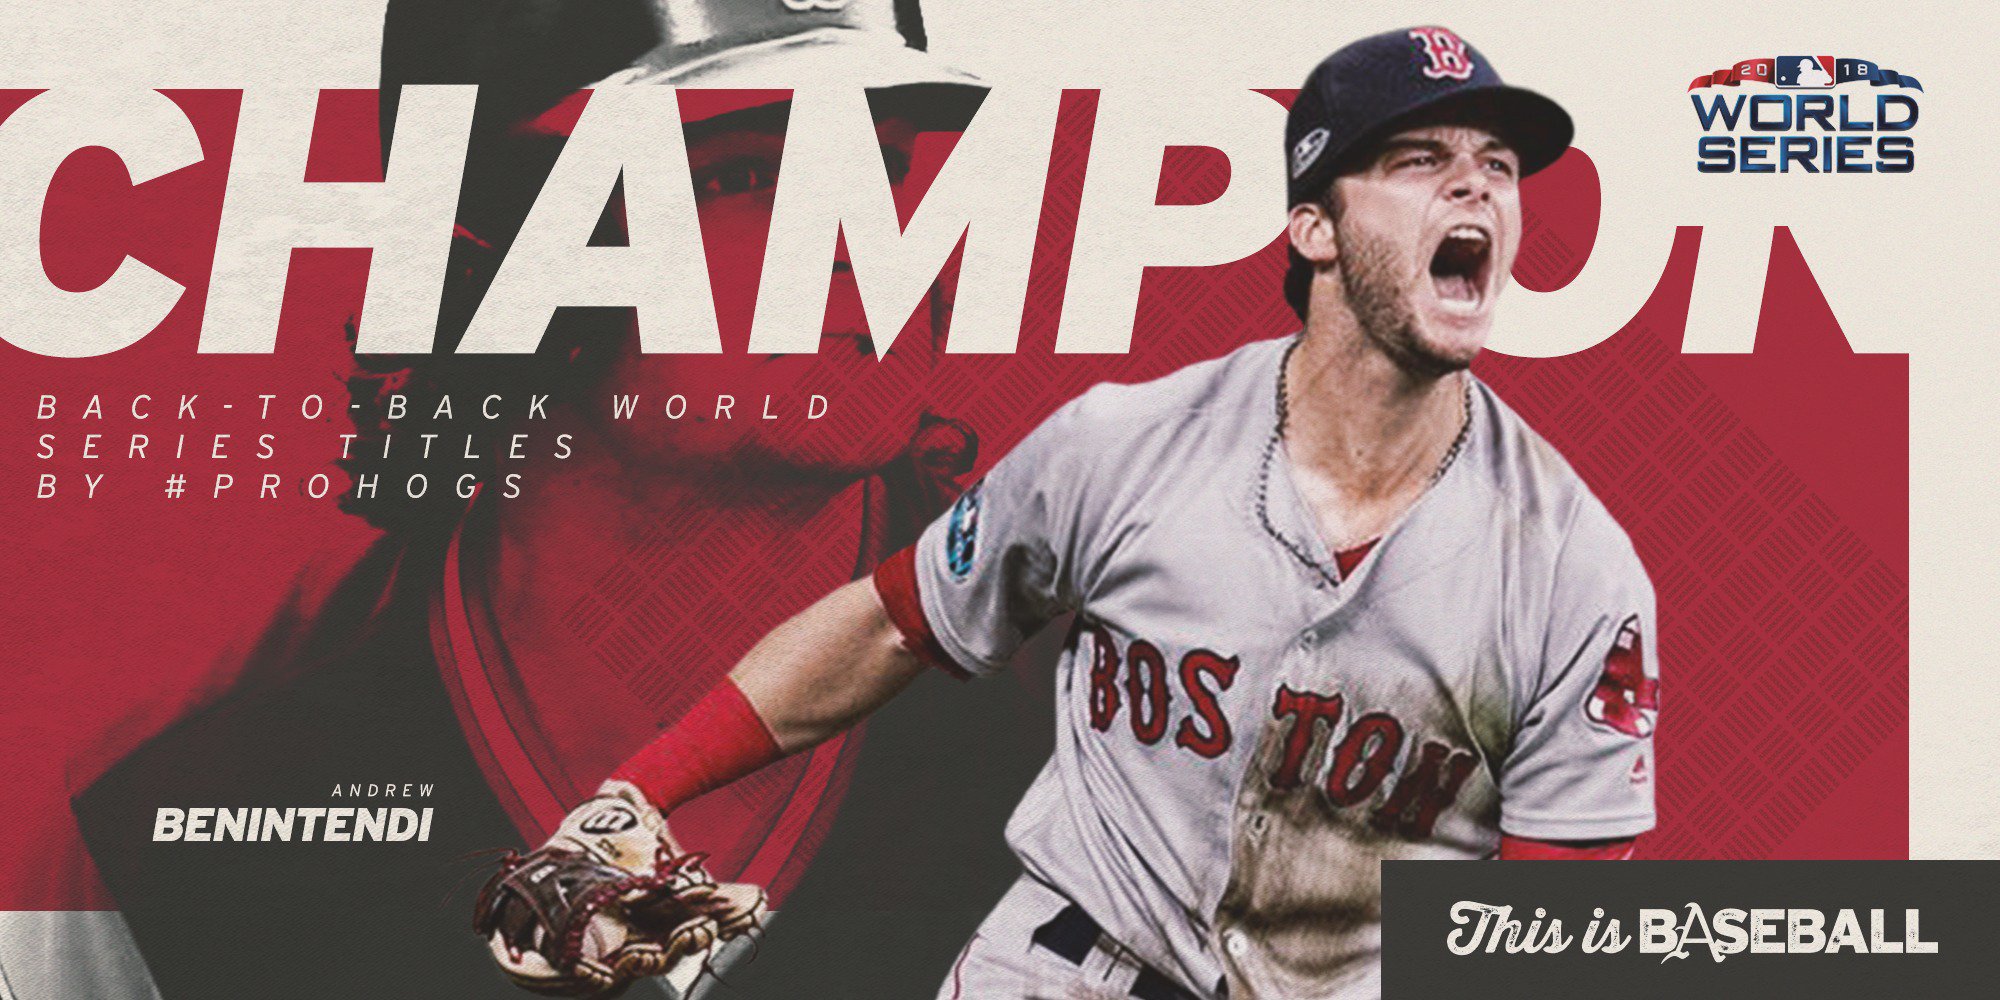 Arkansas Baseball on Twitter: WORLD SERIES CHAMPI🐗N!!! Congratulations to Andrew  Benintendi as he becomes the fourth Razorback to win a World Series title!!  #DoDamage  / X